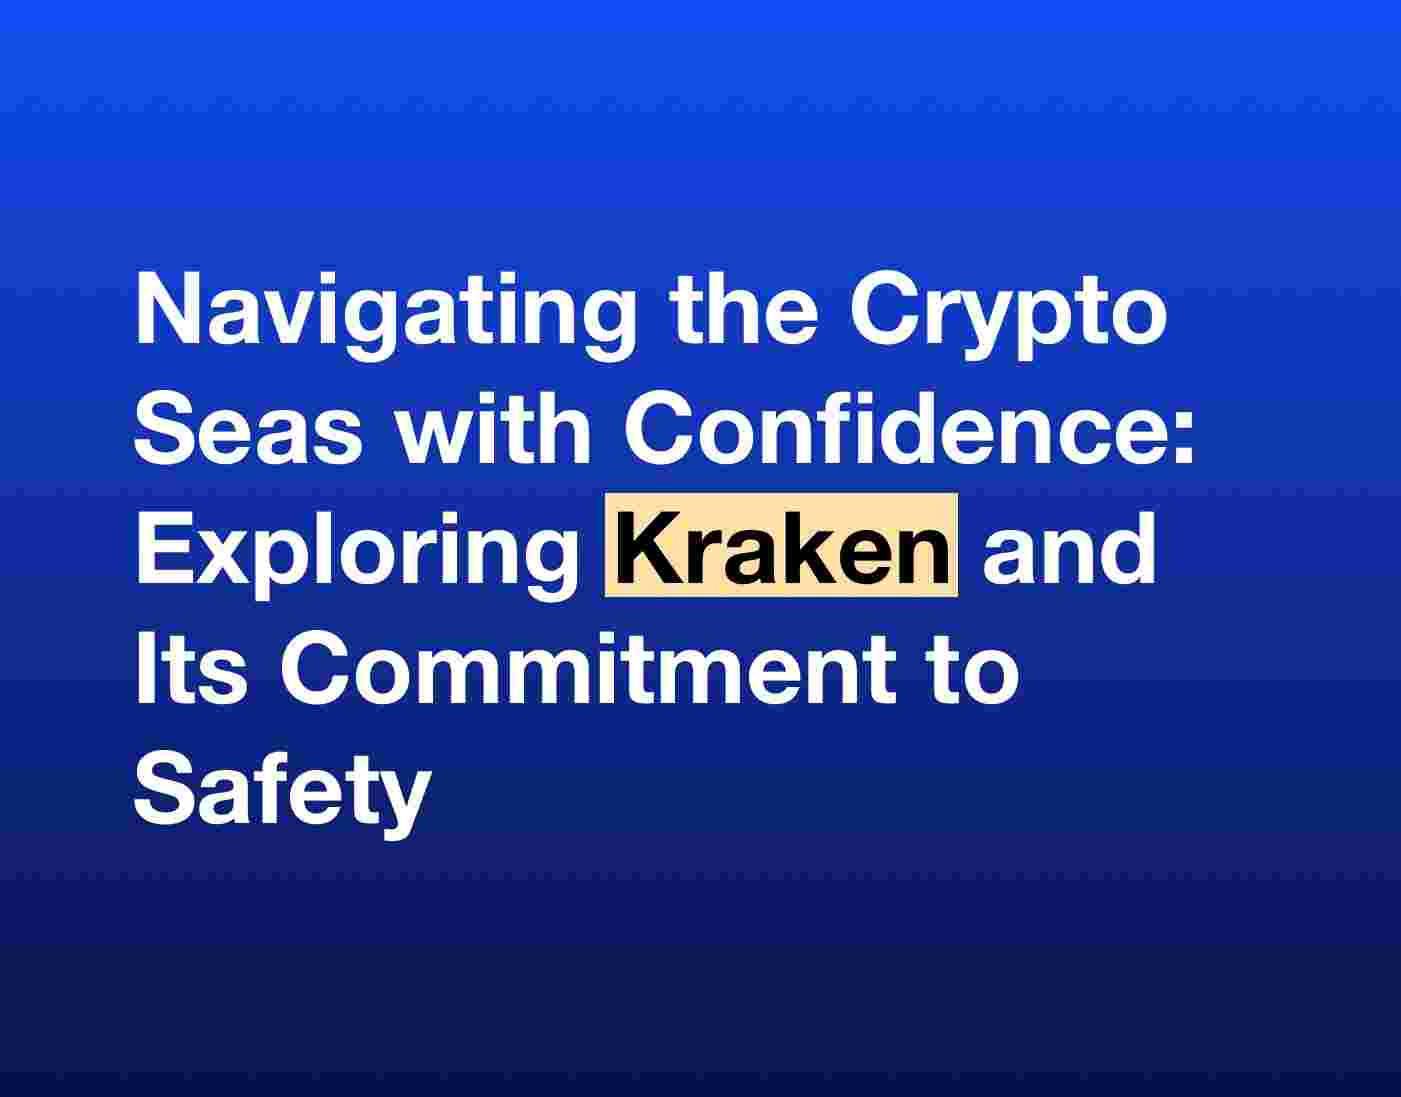 Navigating the Crypto Seas with Confidence: Exploring Kraken and Its Commitment to Safety"